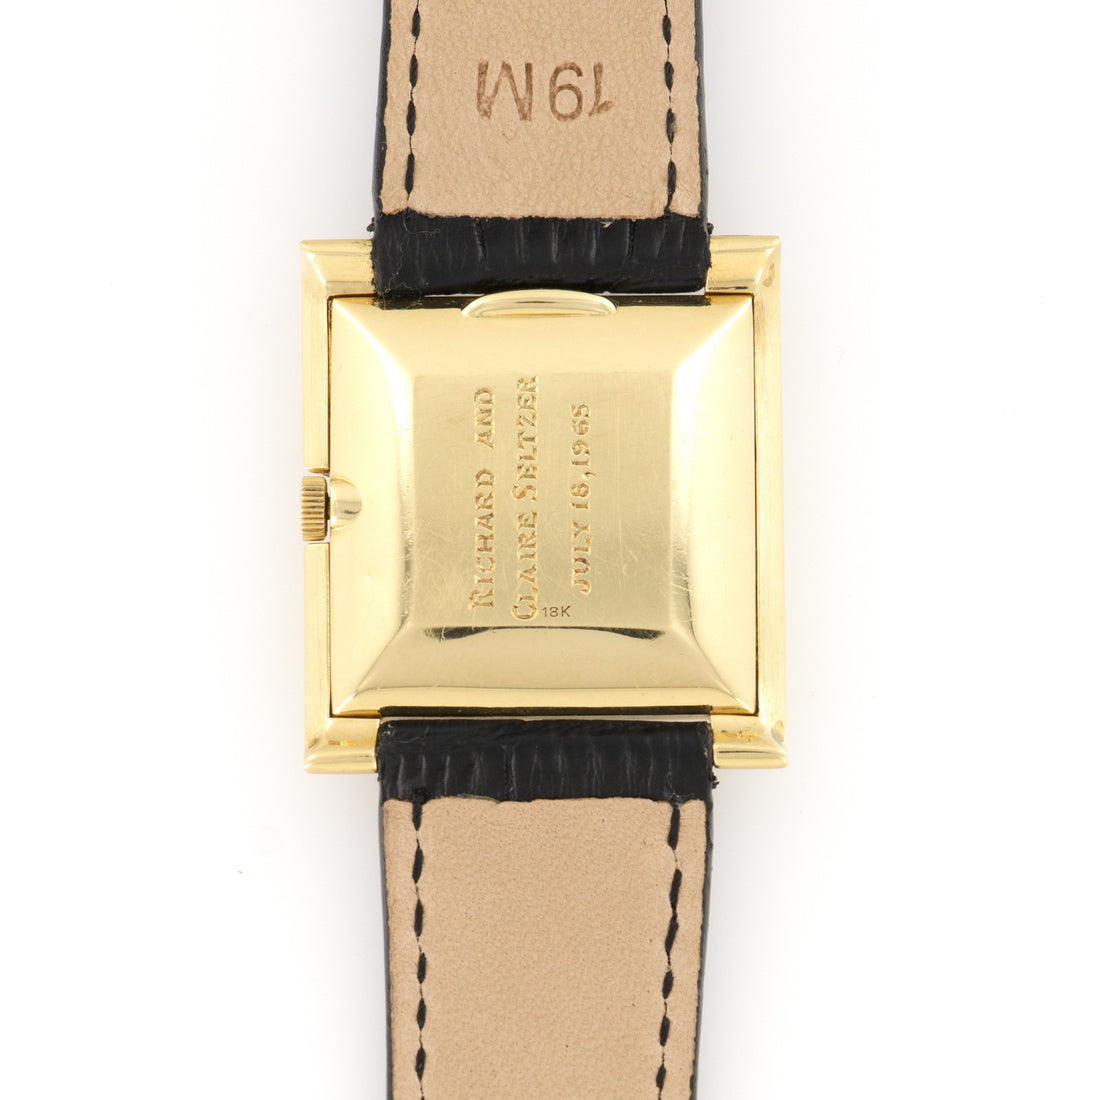 Patek Philippe Yellow Gold Strap Watch, Ref. 2562, Retailed by Tiffany & Co.